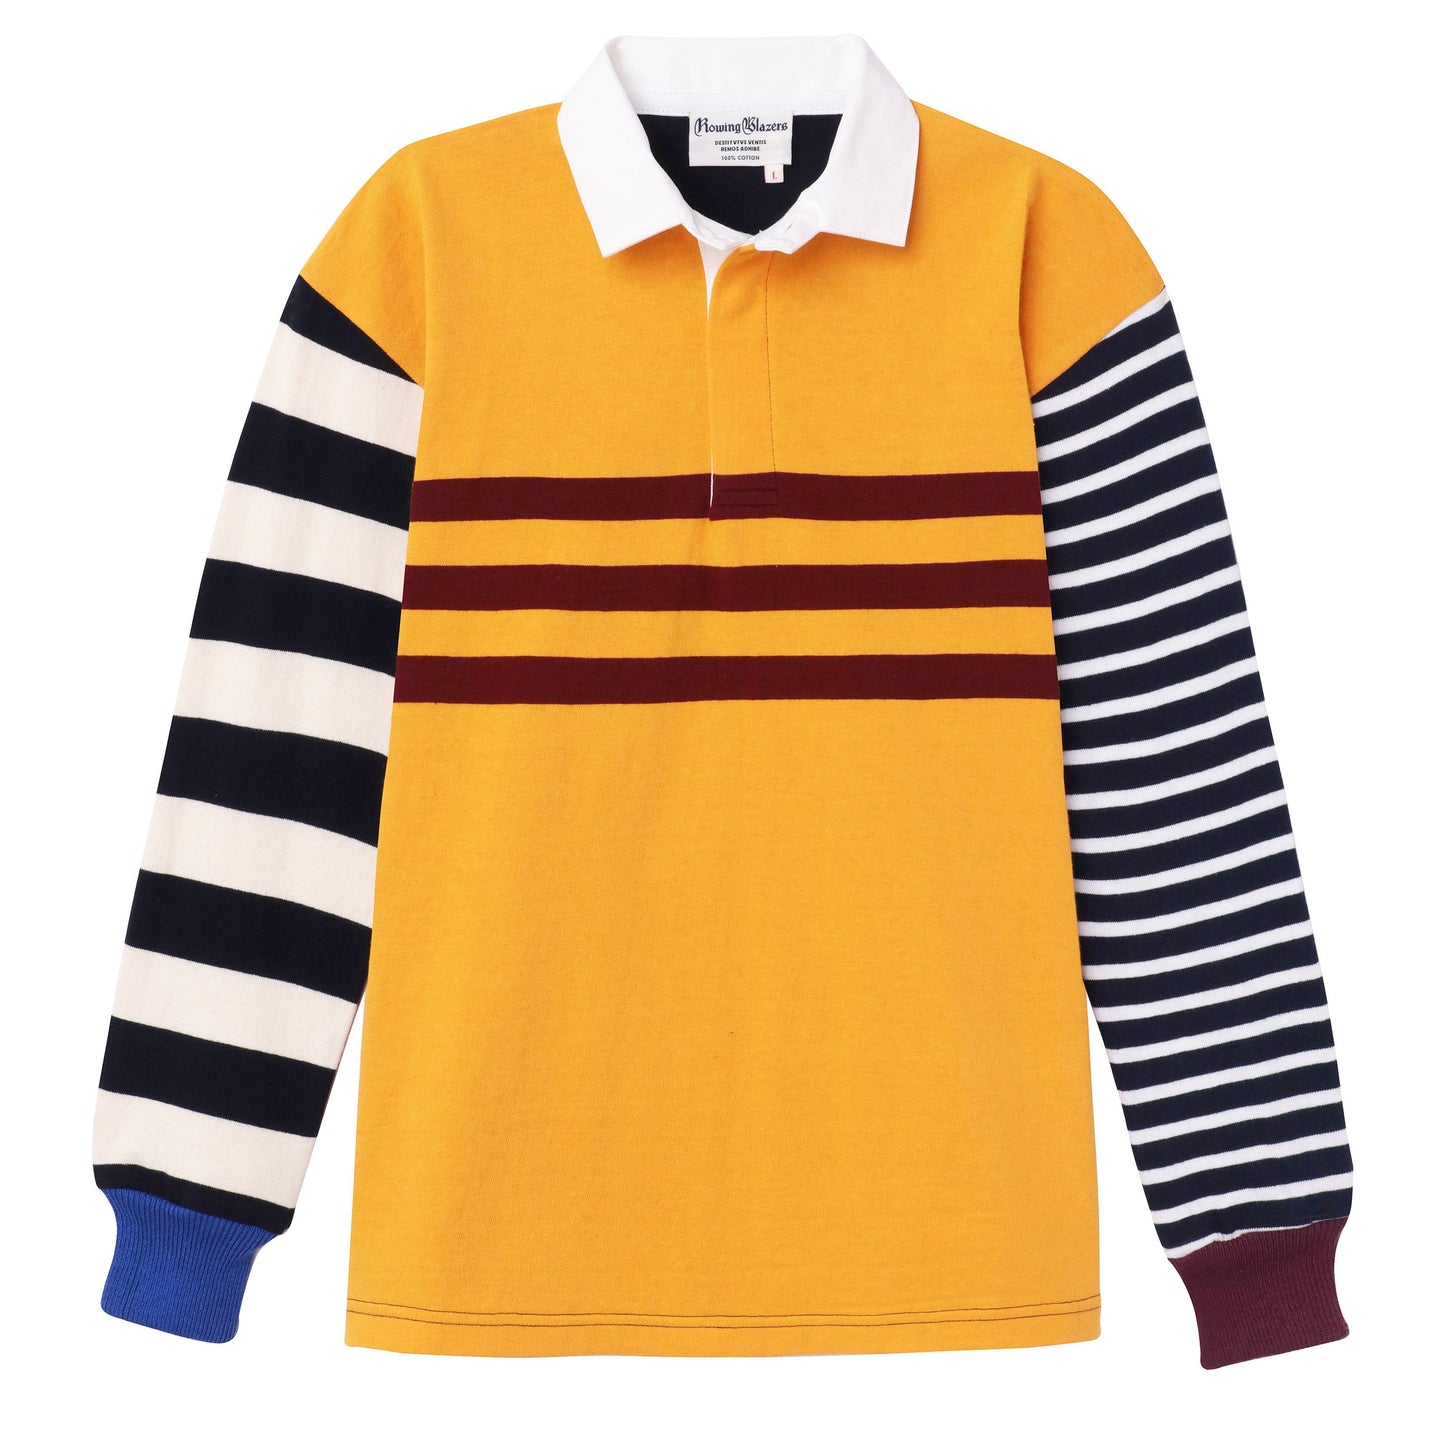 One-of-one striped rugby shirt made from leftover fabric. Yellow with burgundy stripes on the body, mismatched sleeves.  Each is unique.